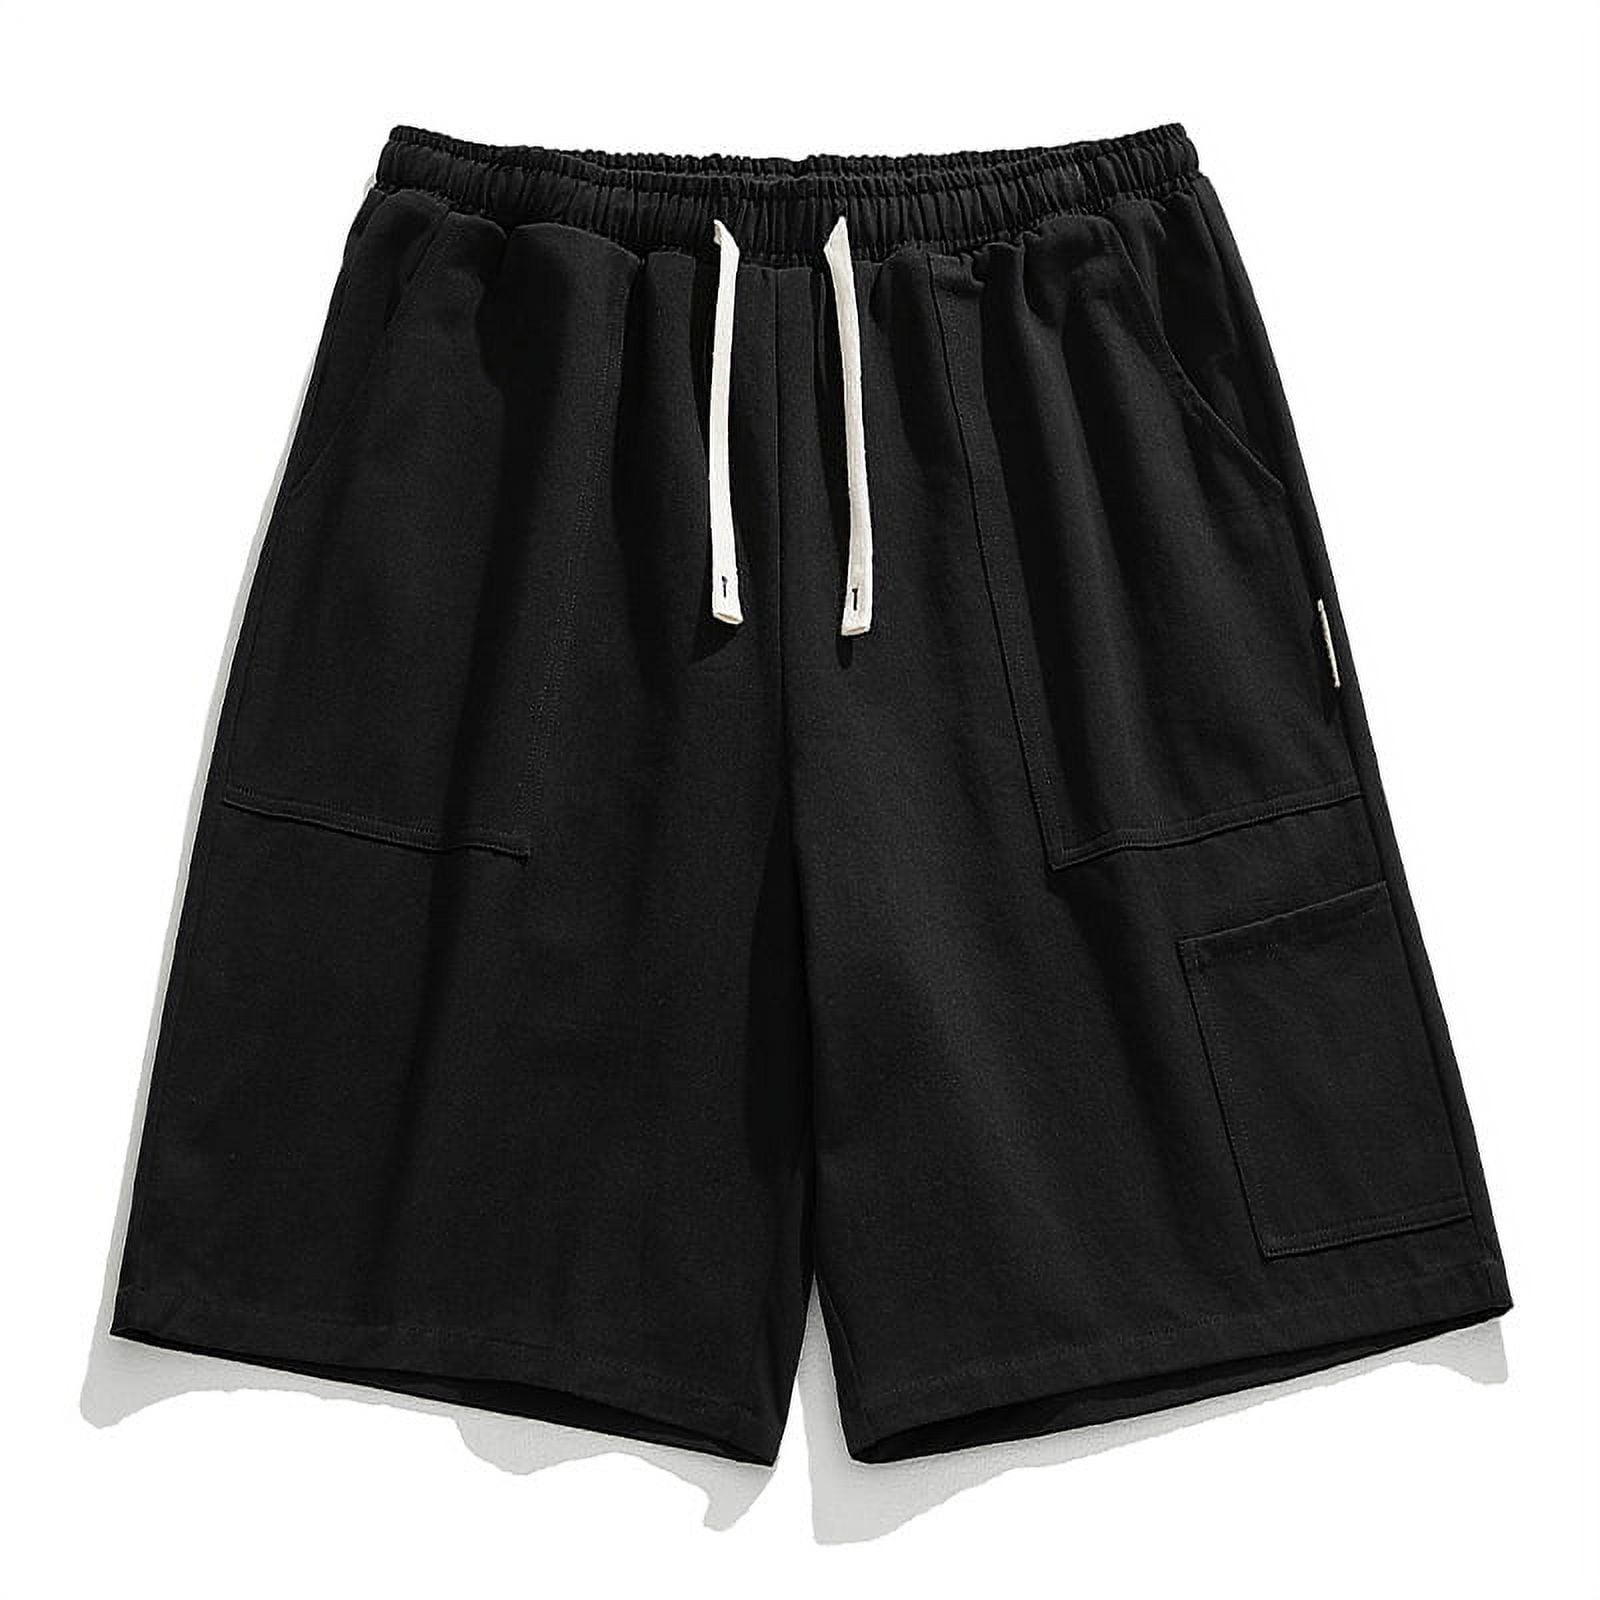 Men's Utility Shorts with Large Pockets Casual Loose Fit Cotton ...